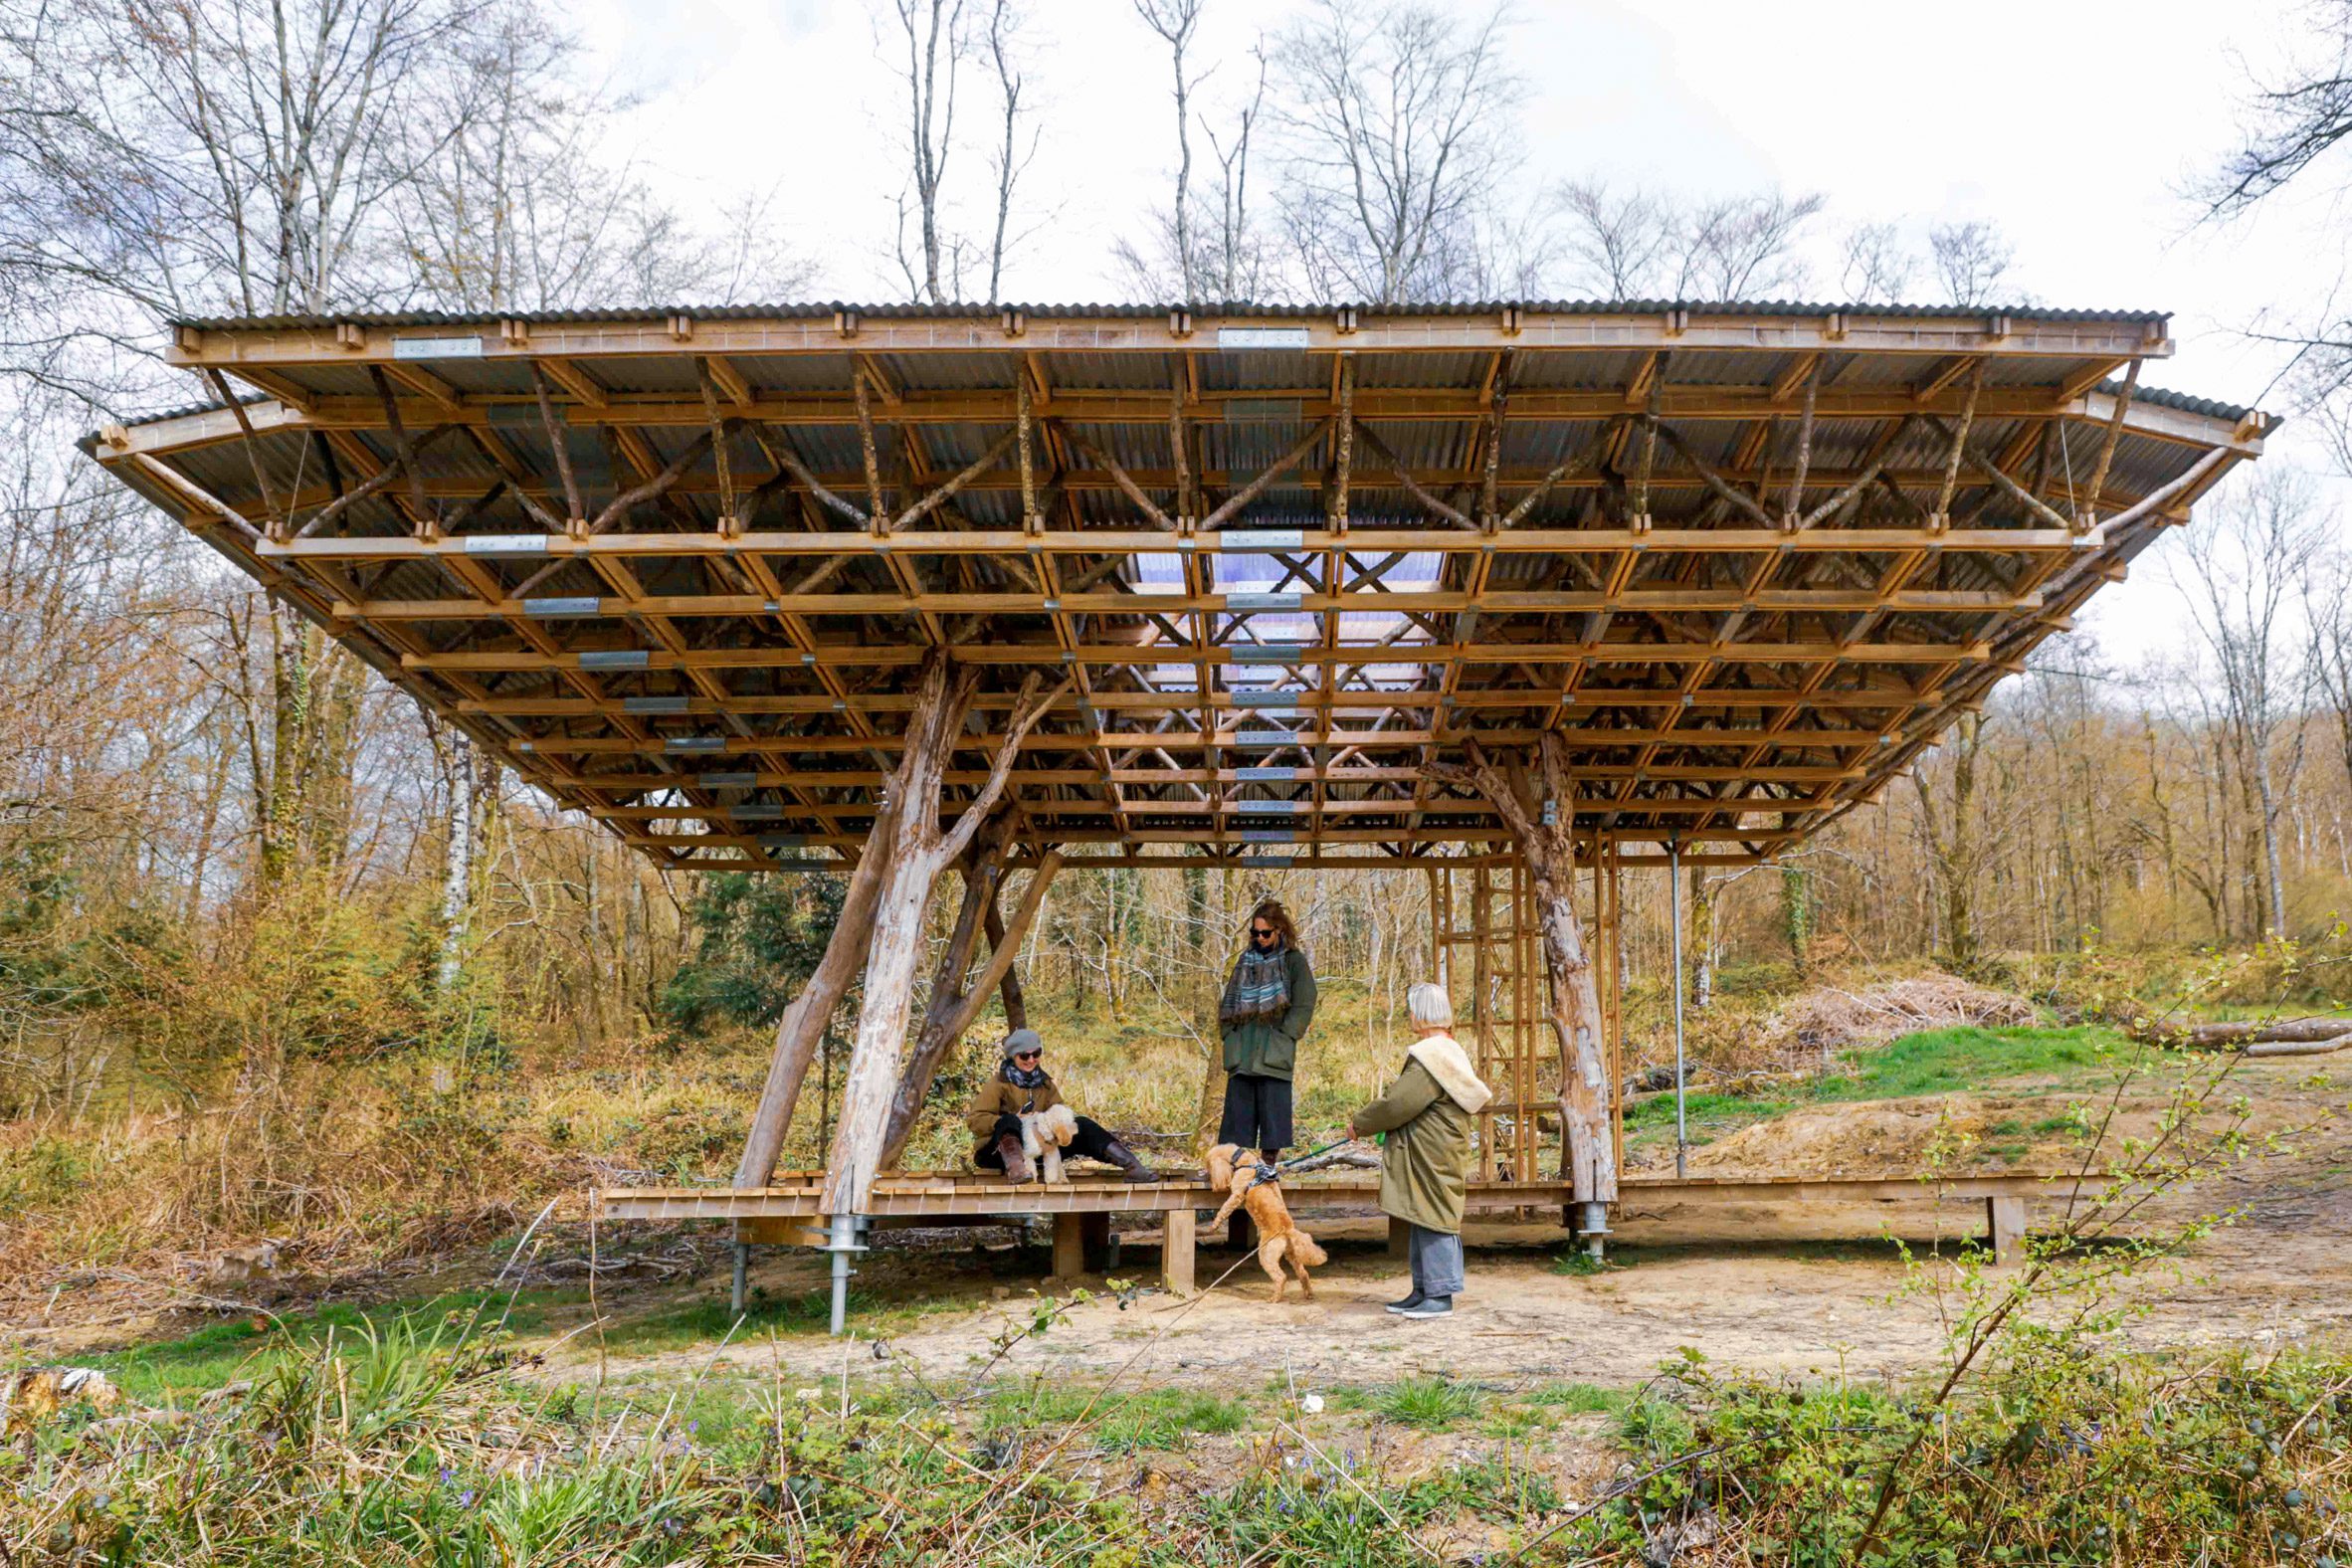 Field Station by Architectural Association students